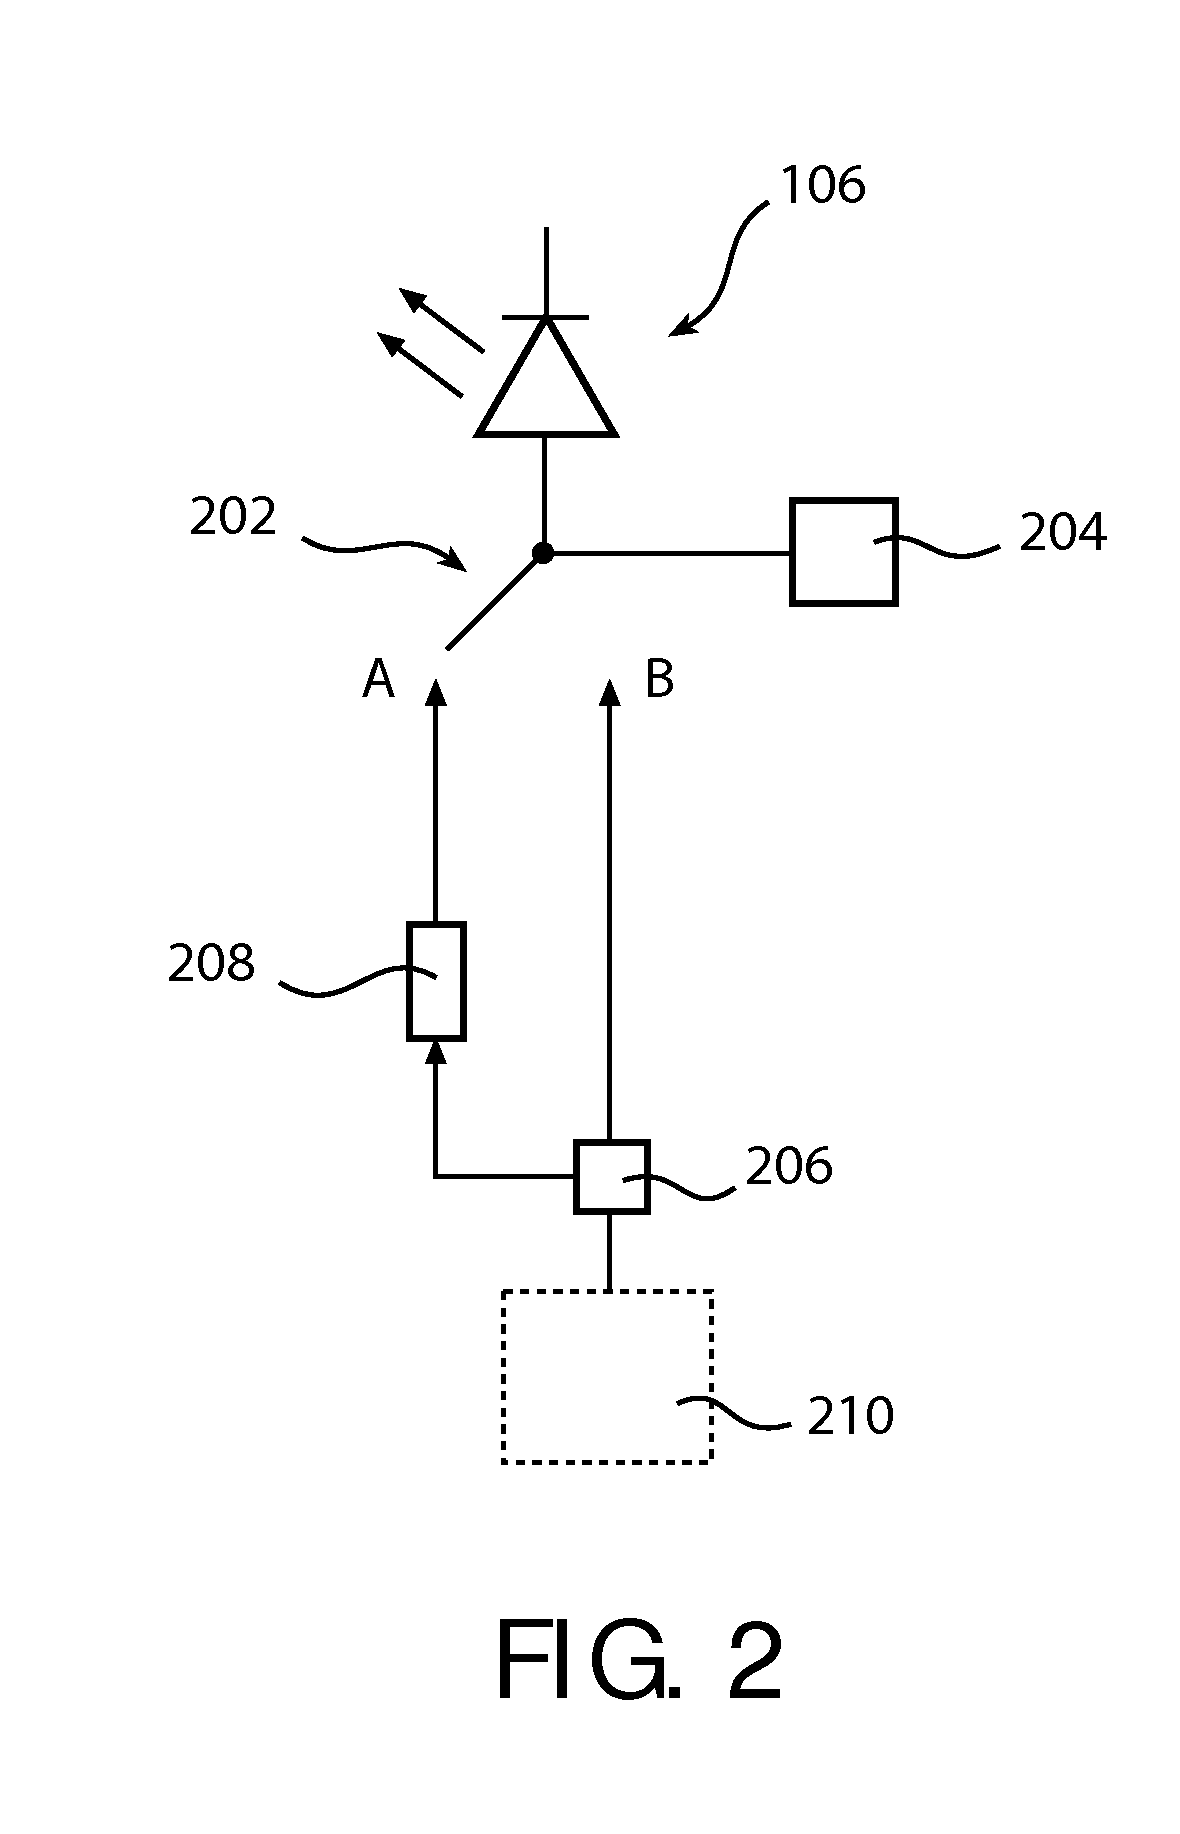 Illumination device comprising an internal power source and an interface for connecting the illumination device to an external power supply